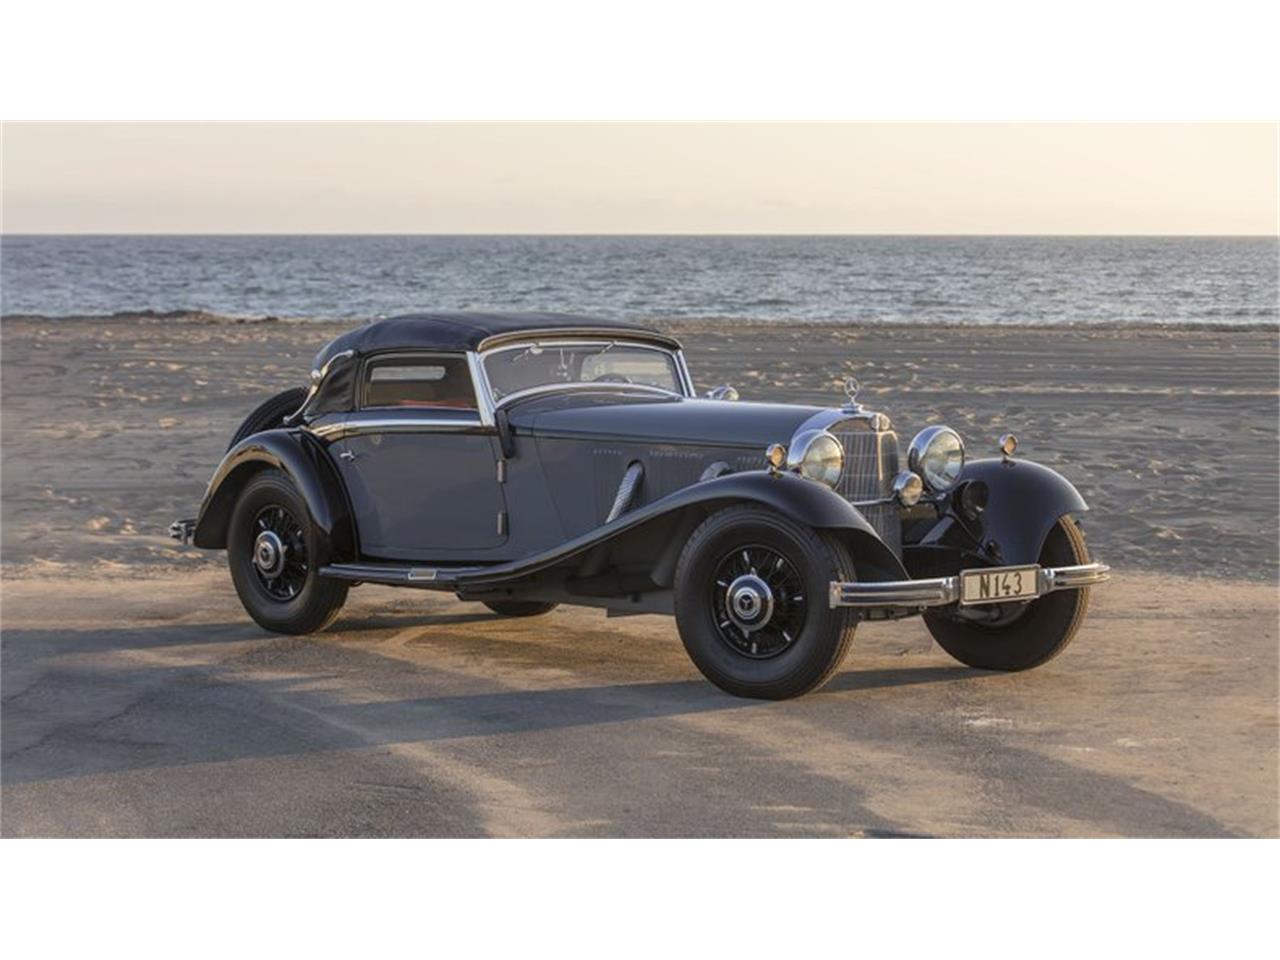 For Sale at Auction: 1935 Mercedes-Benz 500 in Monterey, California for sale in Monterey, CA